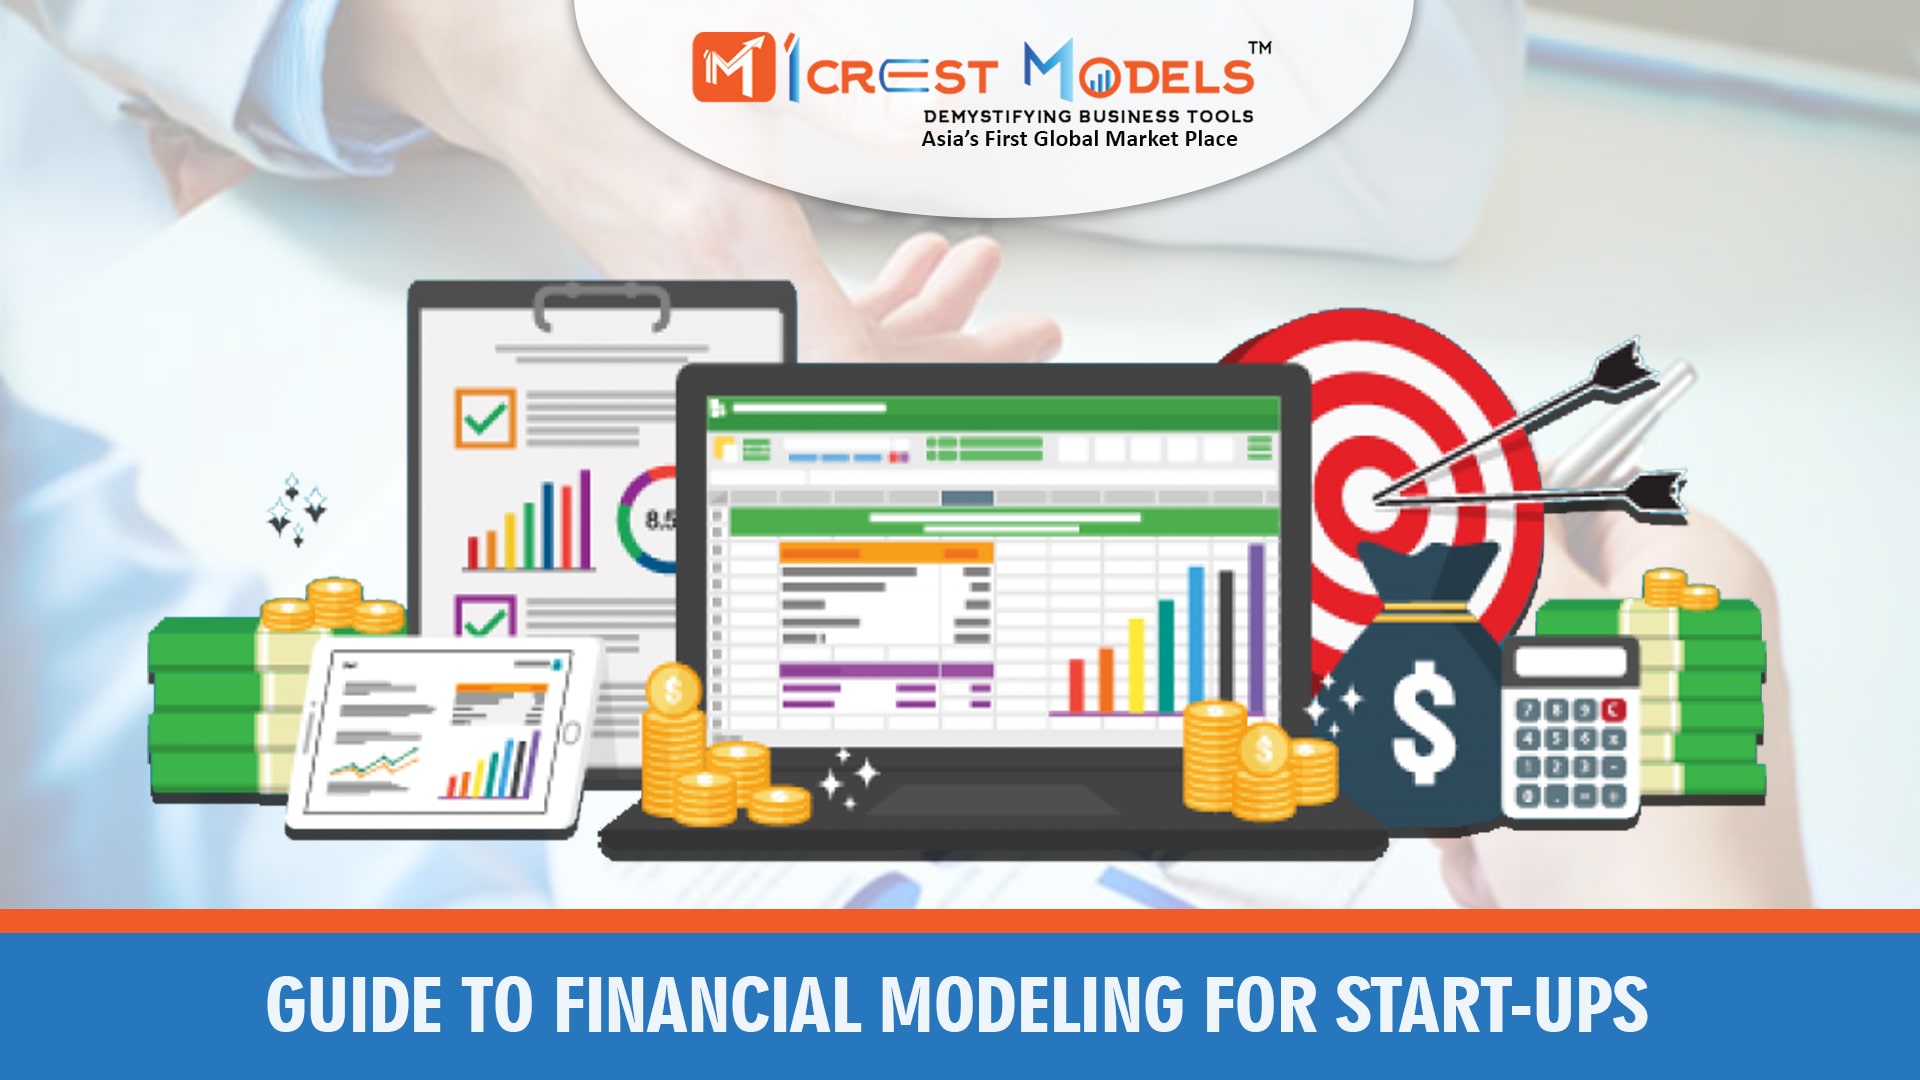 Guide To Financial Modeling for Start-ups